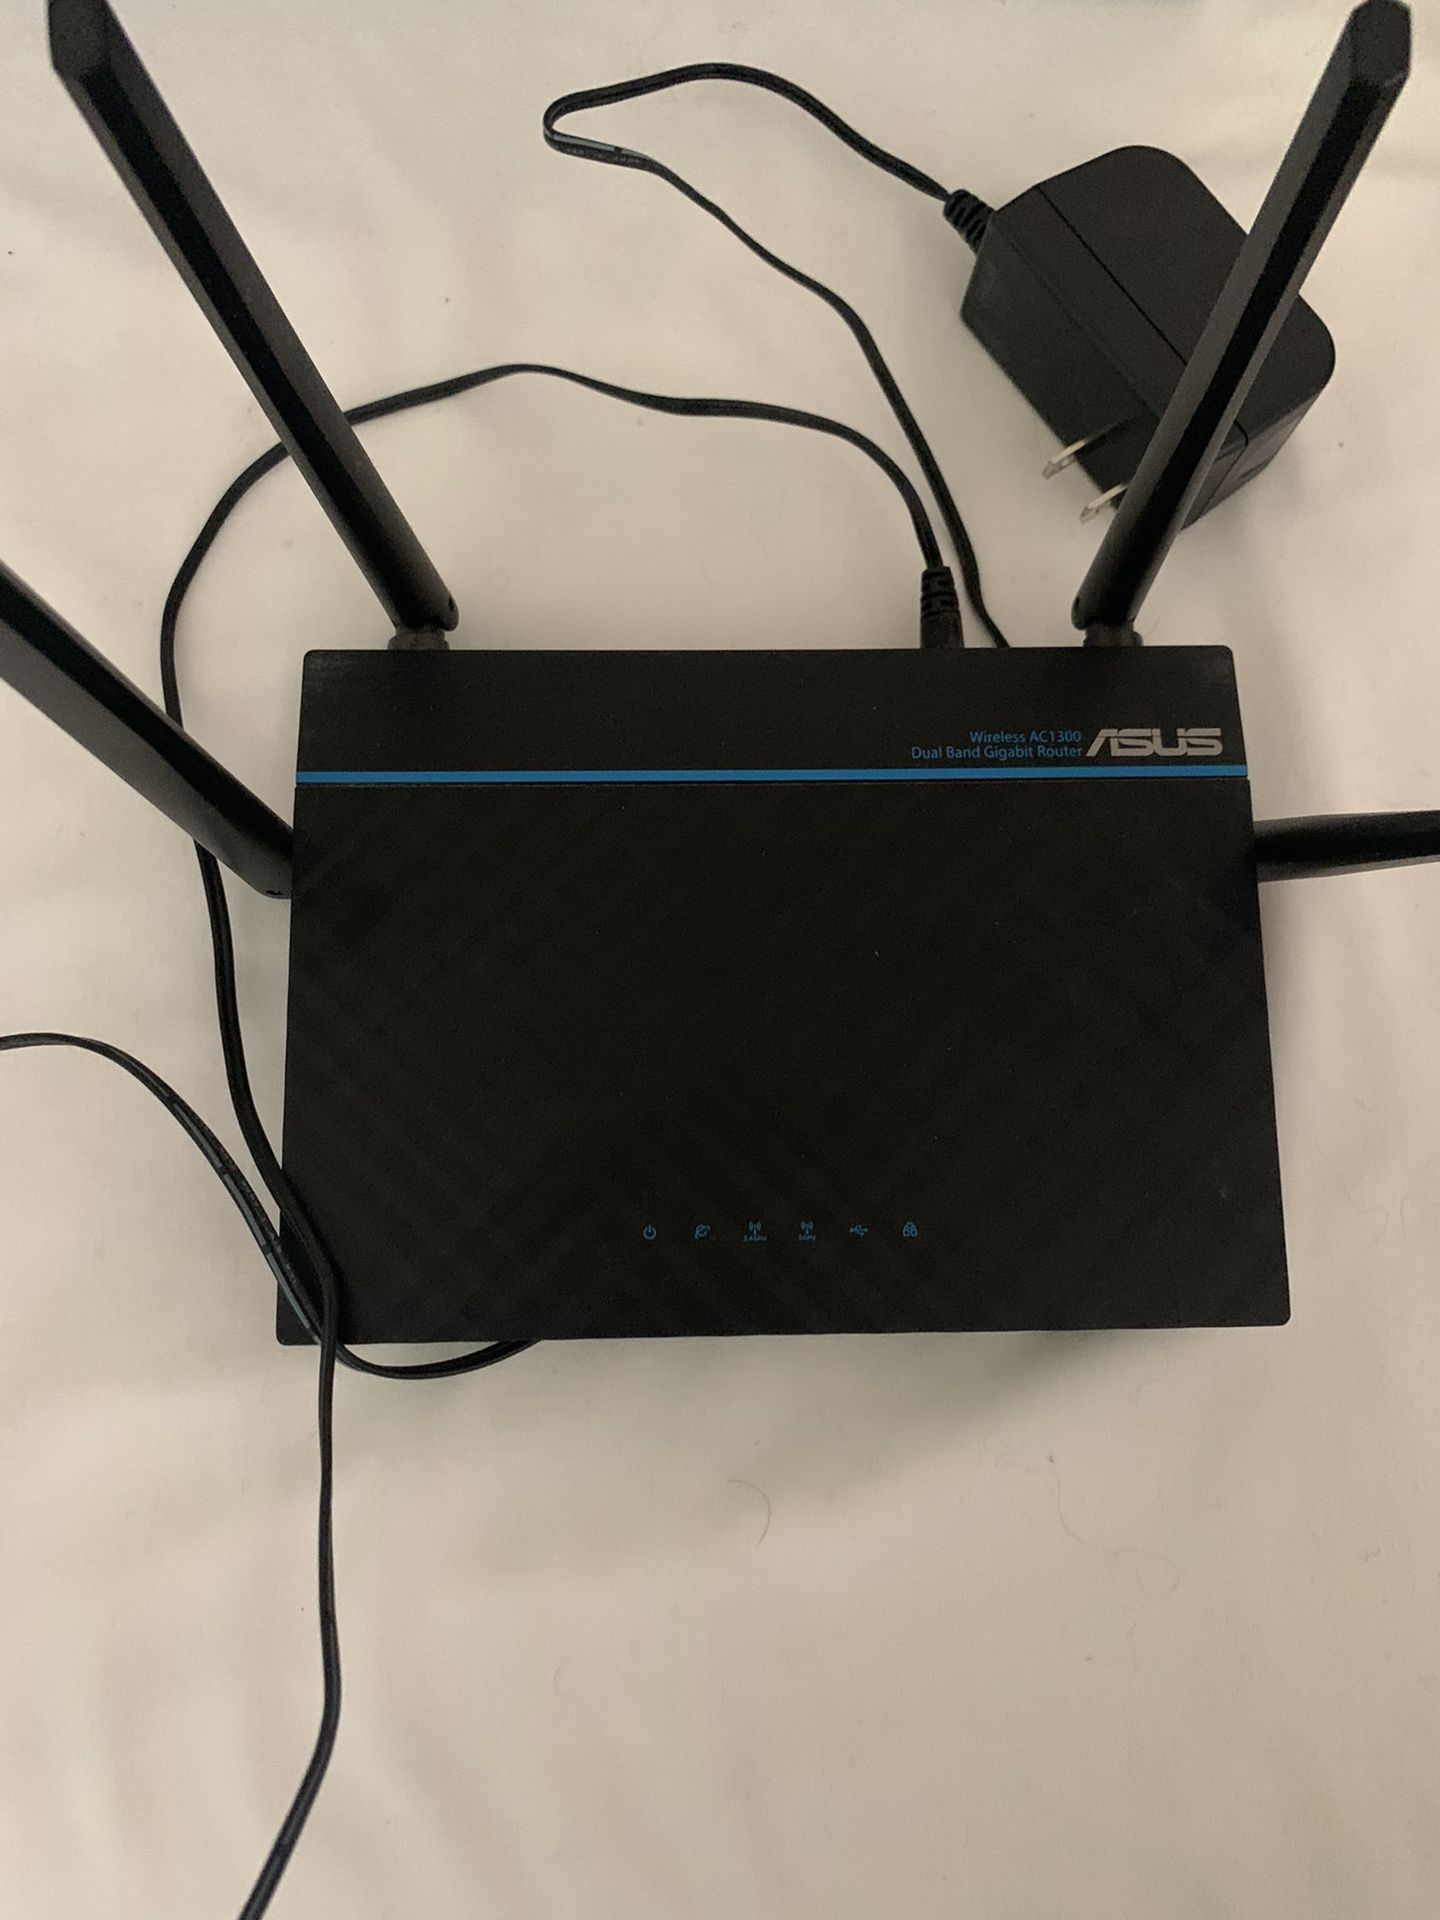 Asus wireless AC1300 WiFi router